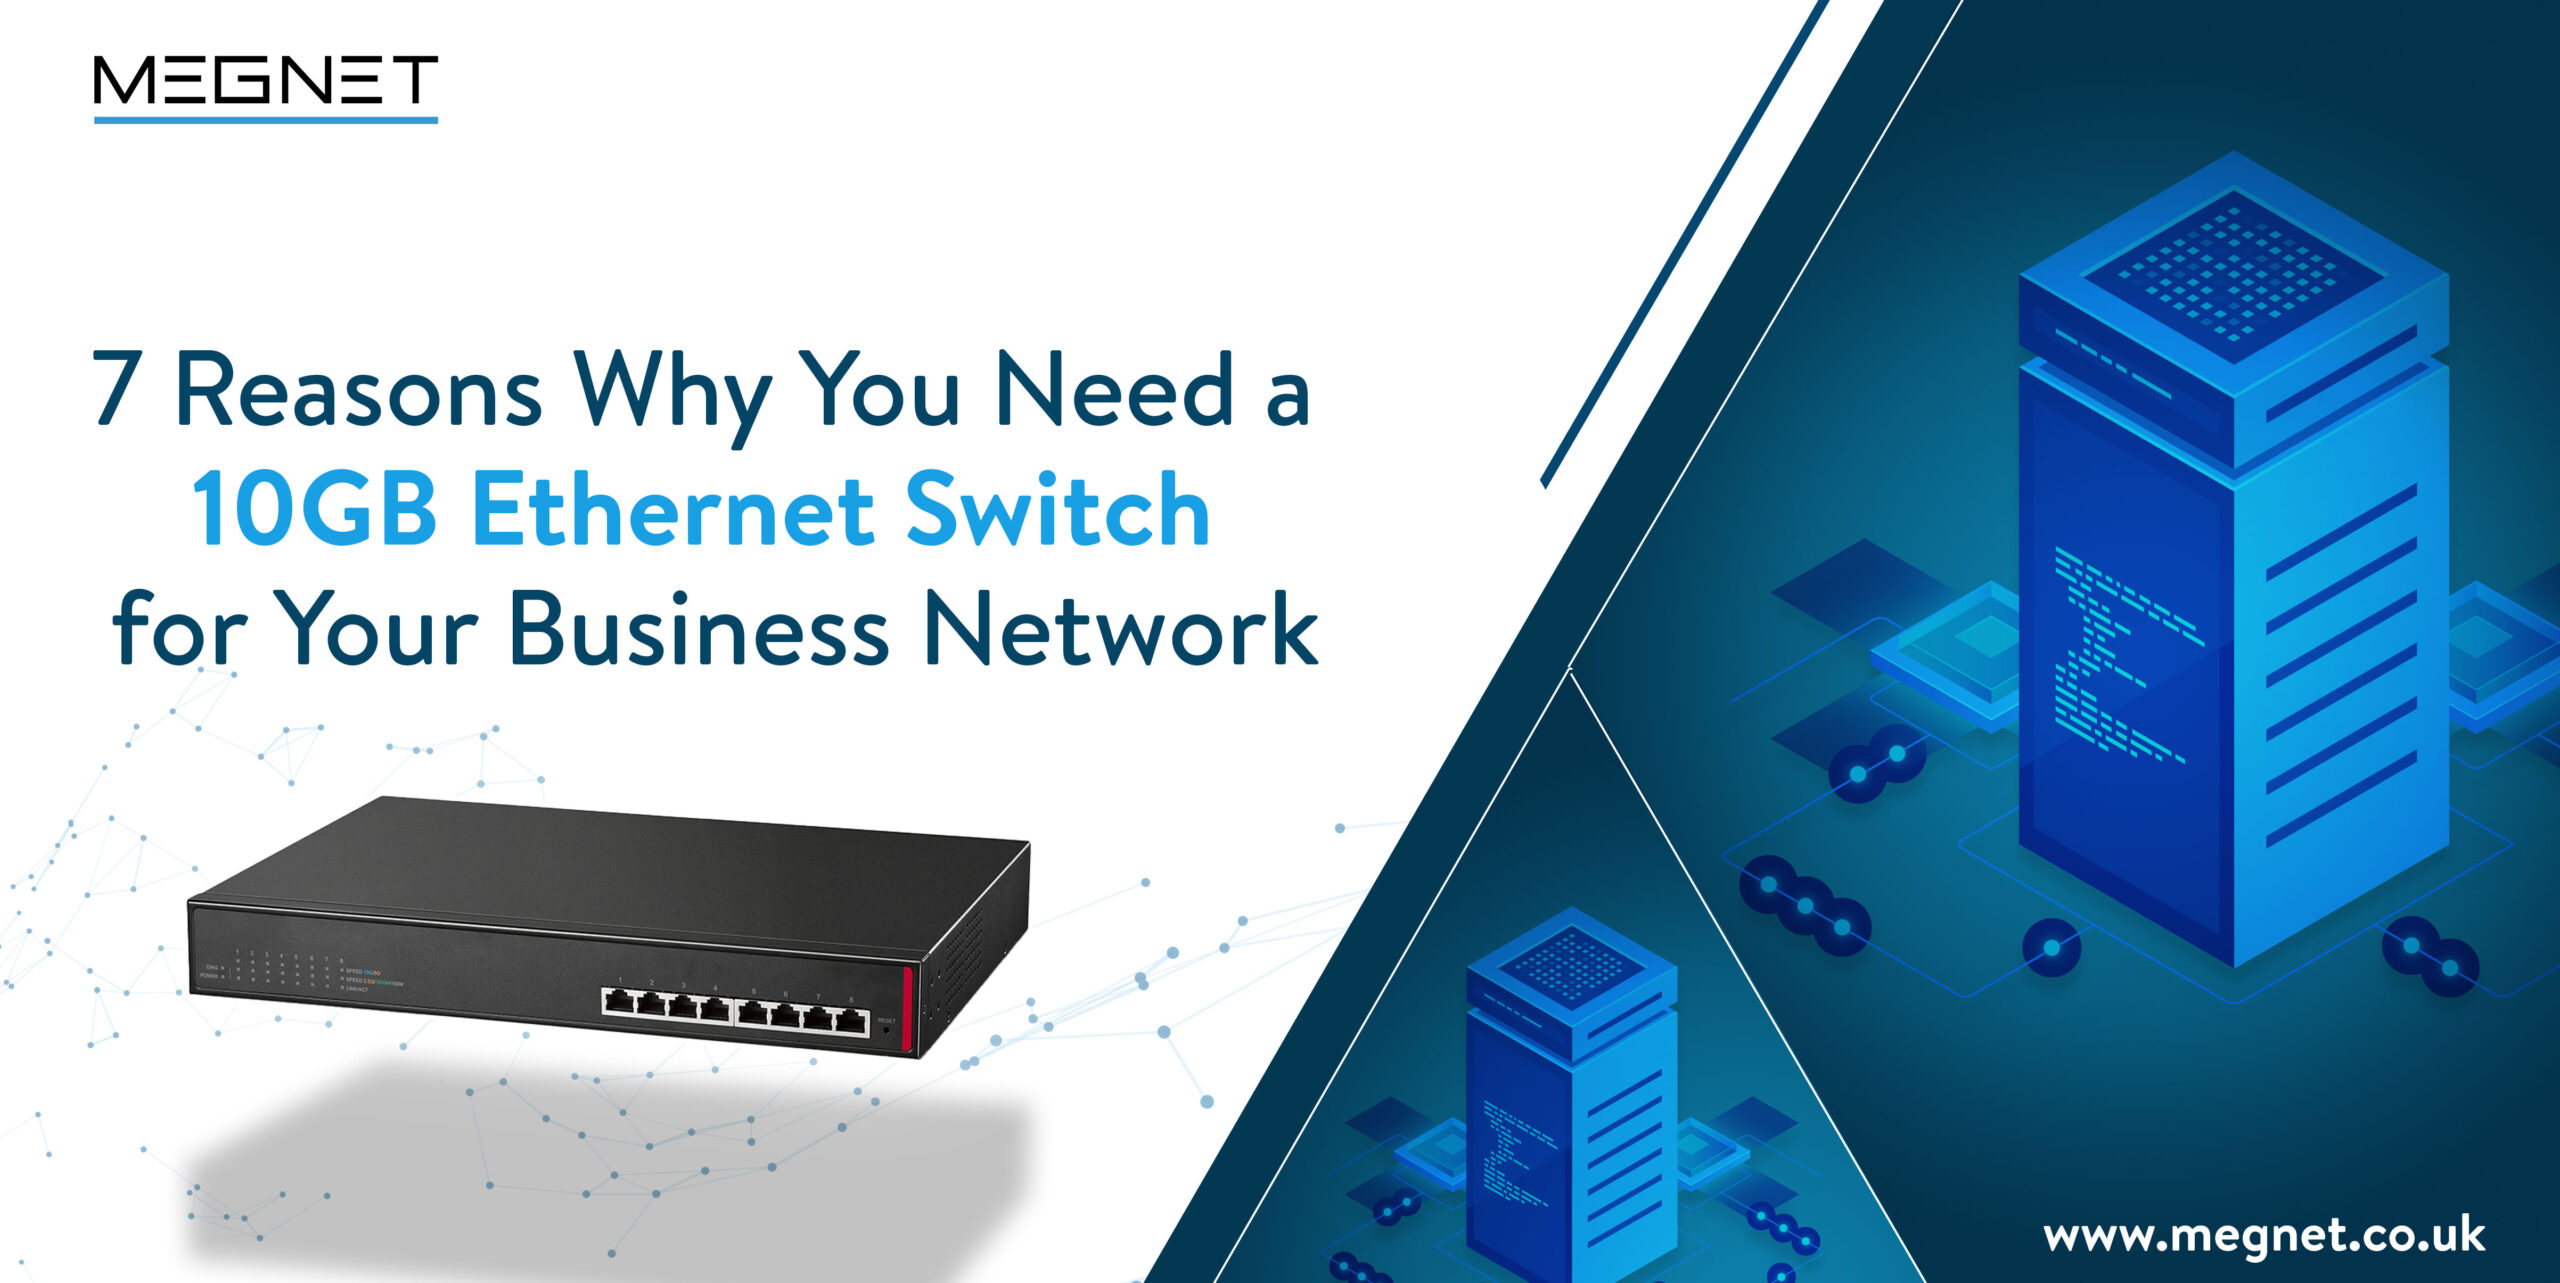 10GB Ethernet Switch | 7 Most Important Reasons to Upgrade Your Ethernet Switch